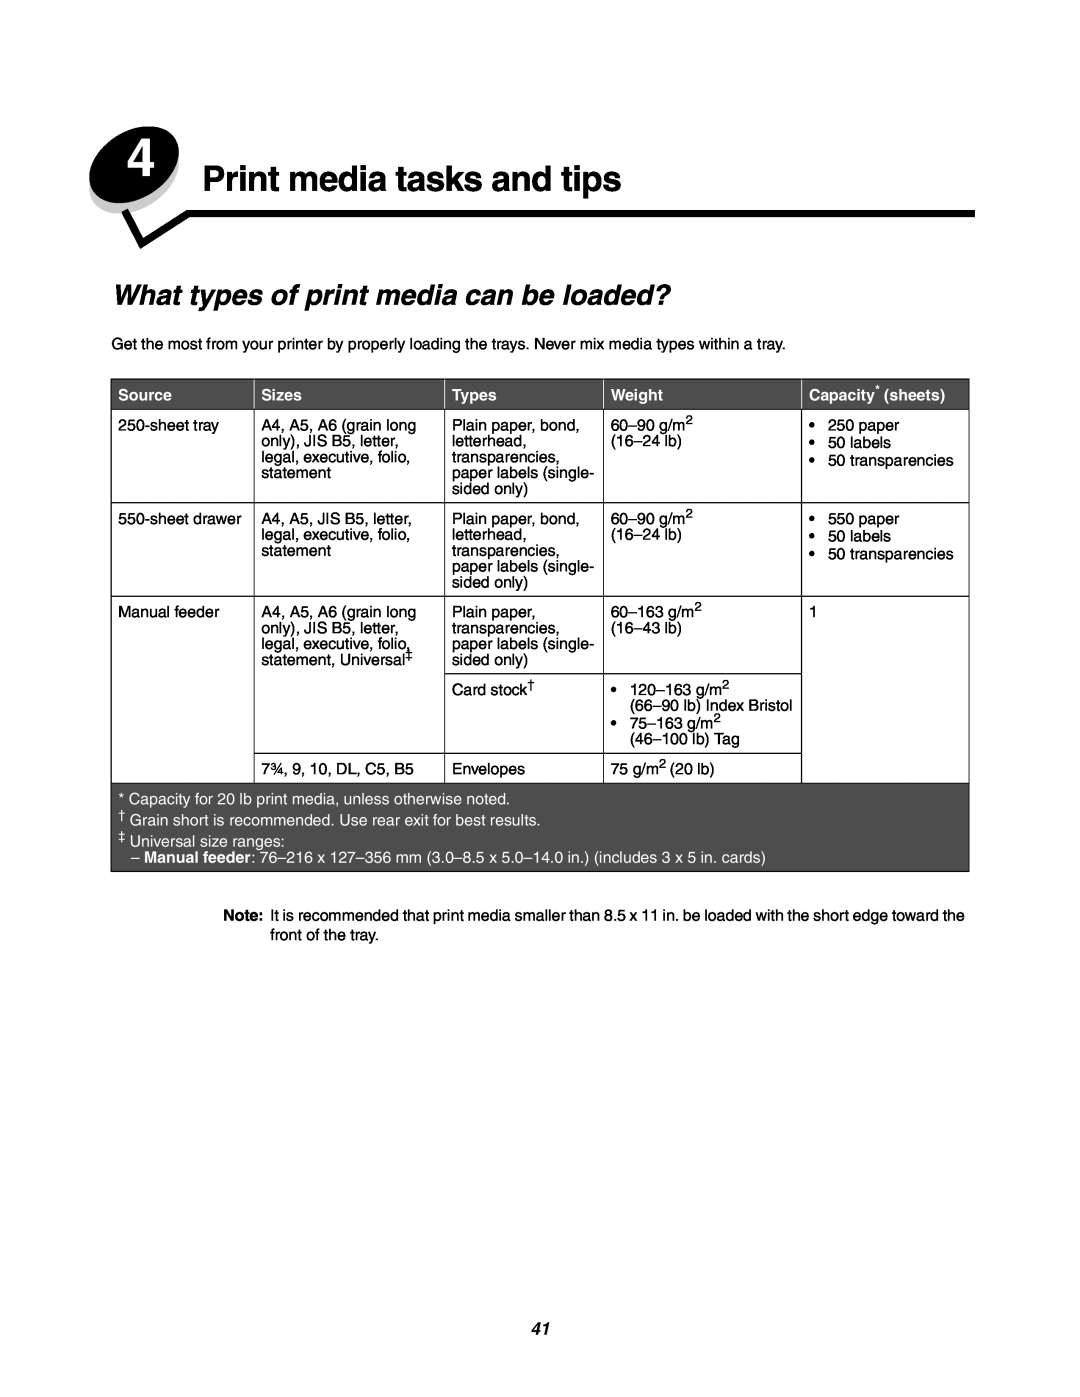 Lexmark 250dn manual Print media tasks and tips, What types of print media can be loaded?, Source, Sizes, Types, Weight 